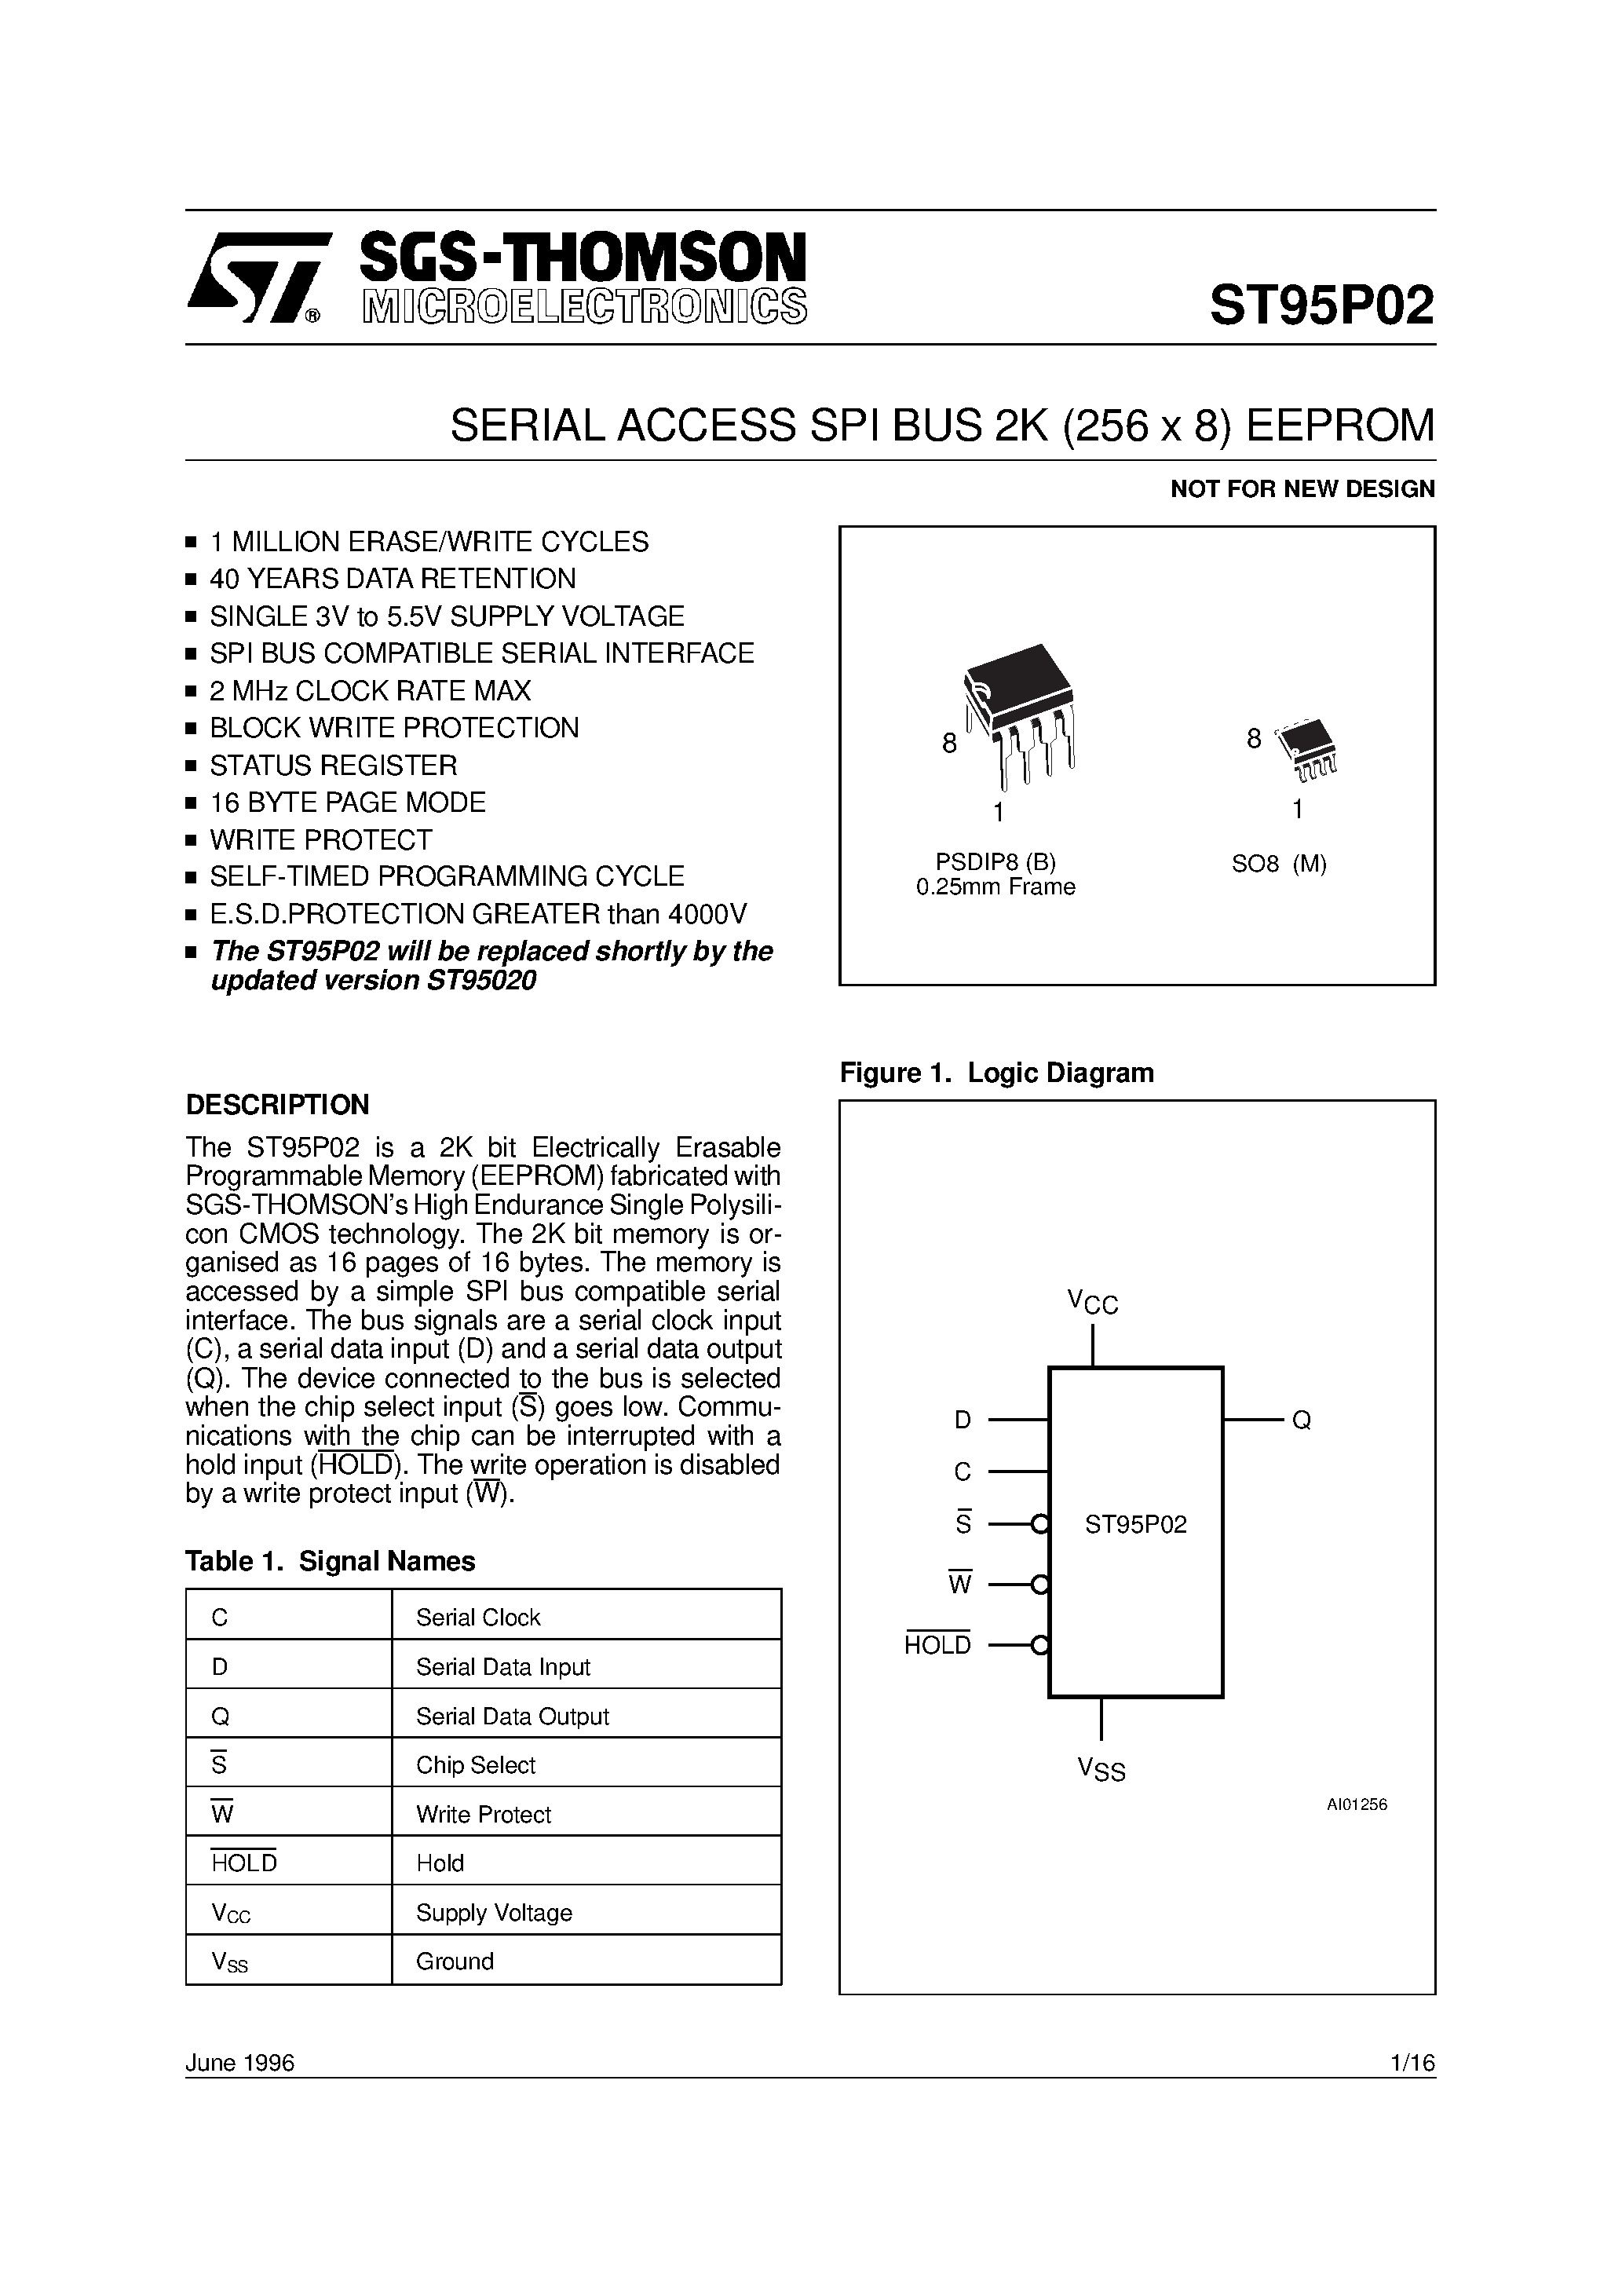 Datasheet ST95P02 - SERIAL ACCESS SPI BUS 2K 256 x 8 EEPROM page 1